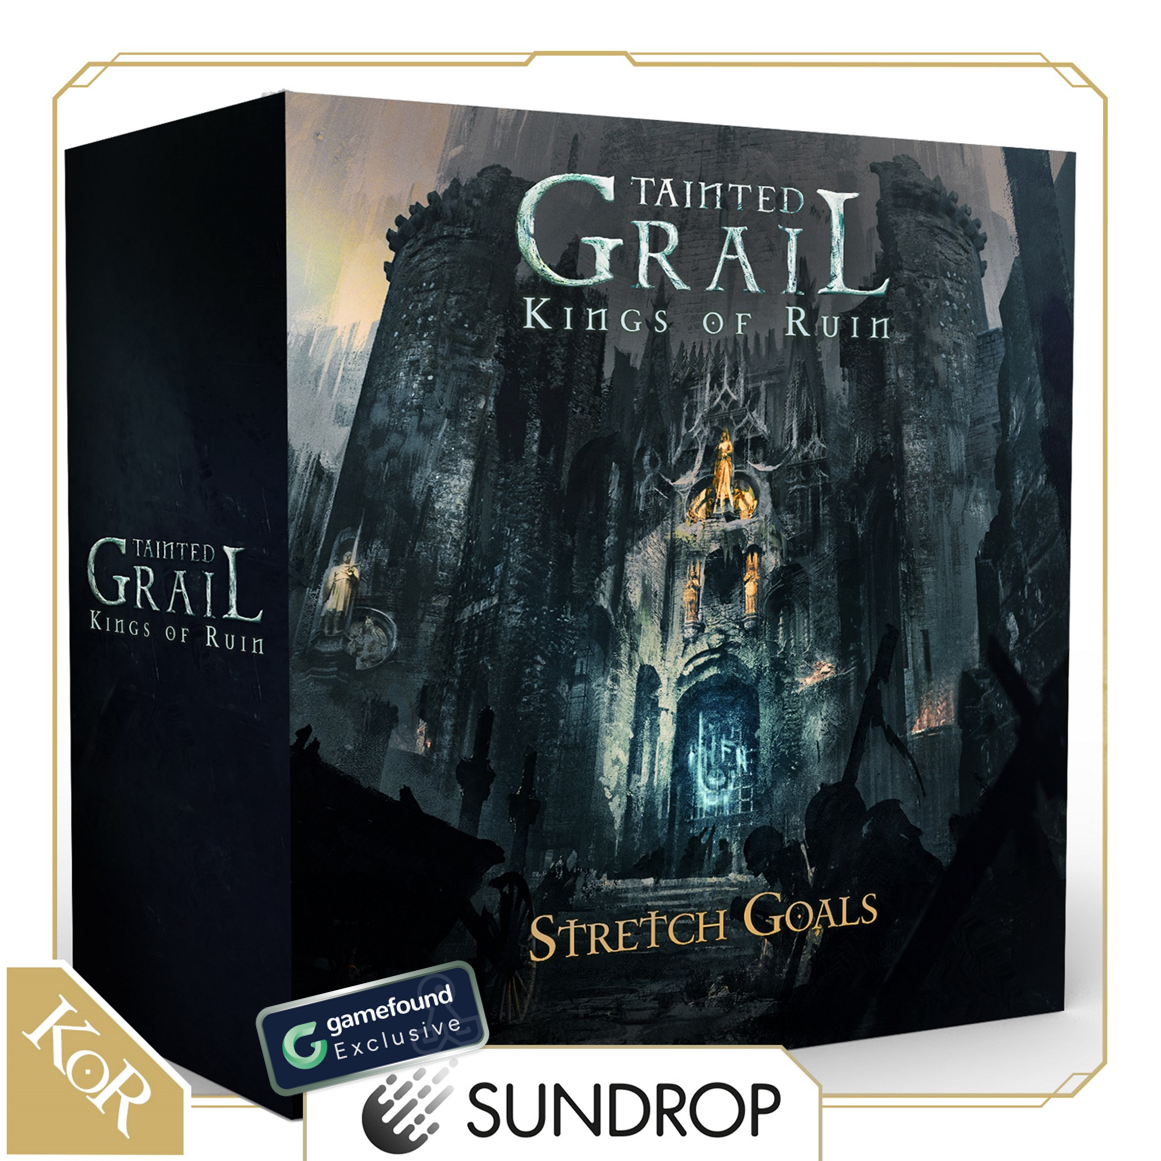 Gamefound Exclusive Tainted Grail: Kings of Ruin Stretch Goals Box, Sundrop Edition